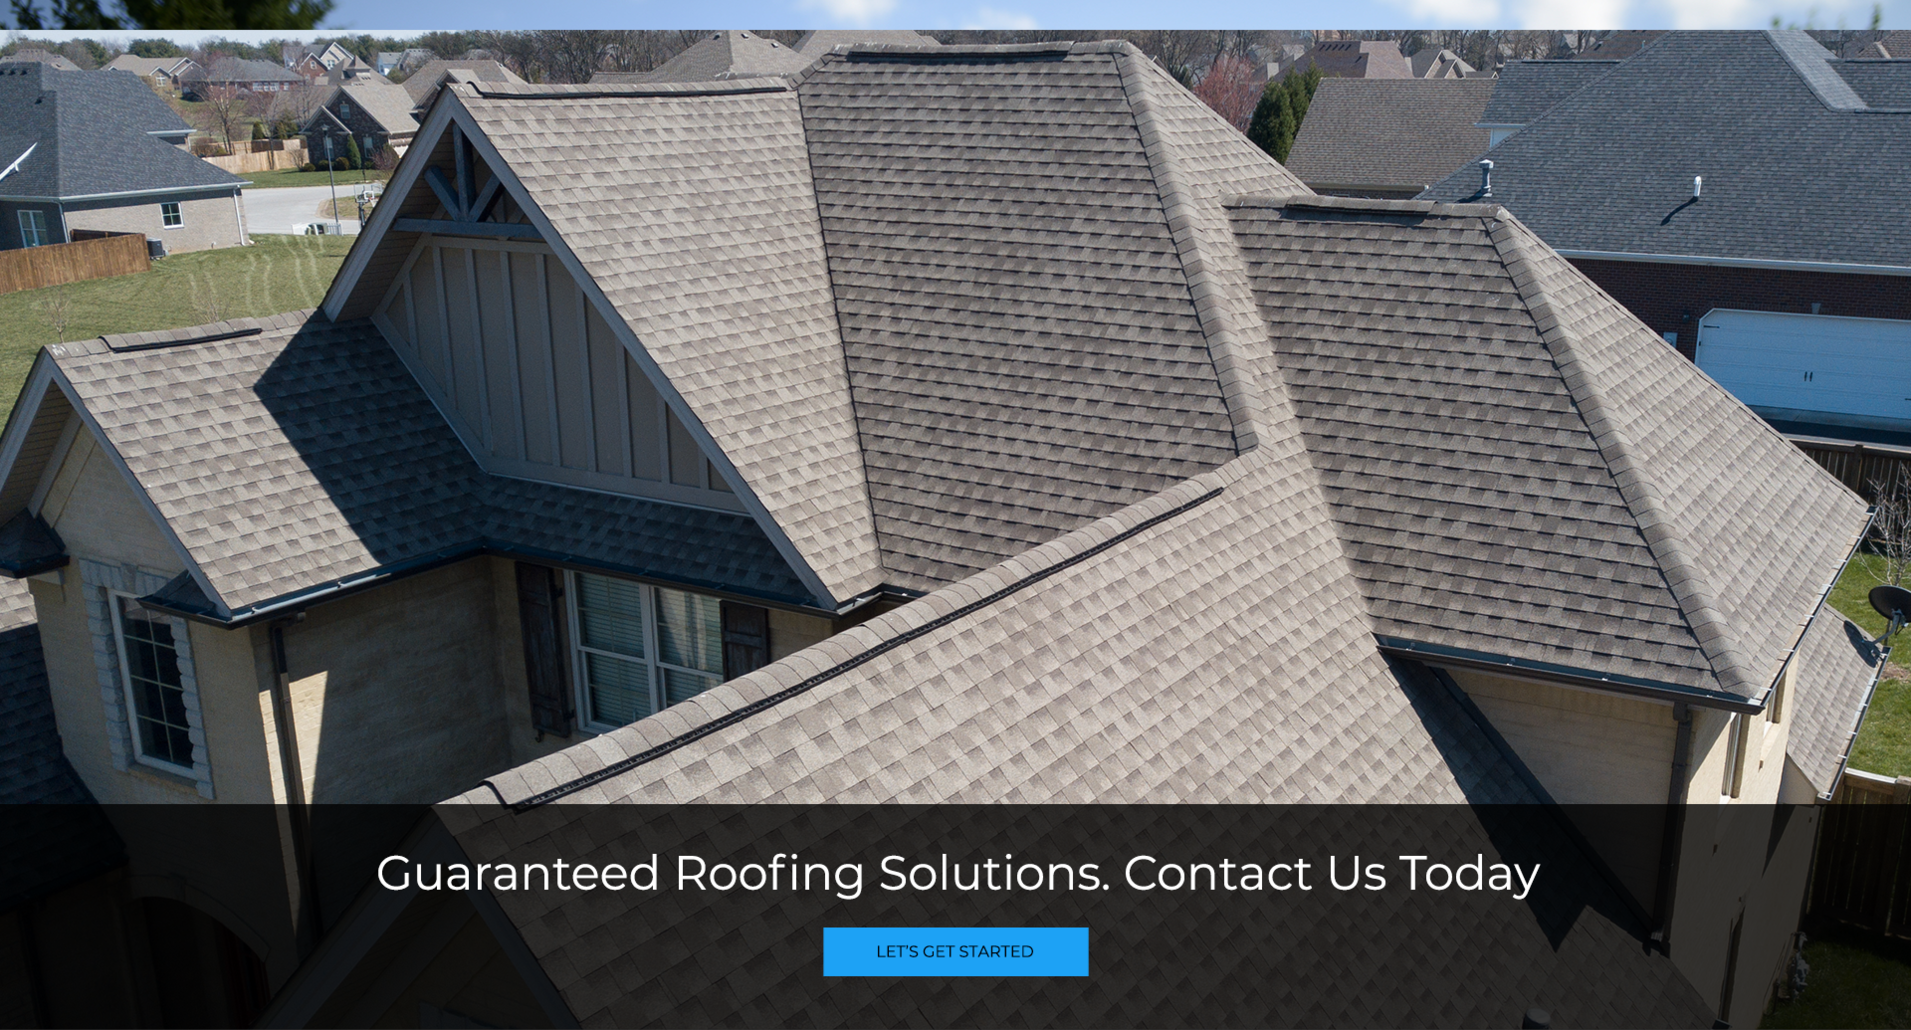 Double C Roofing